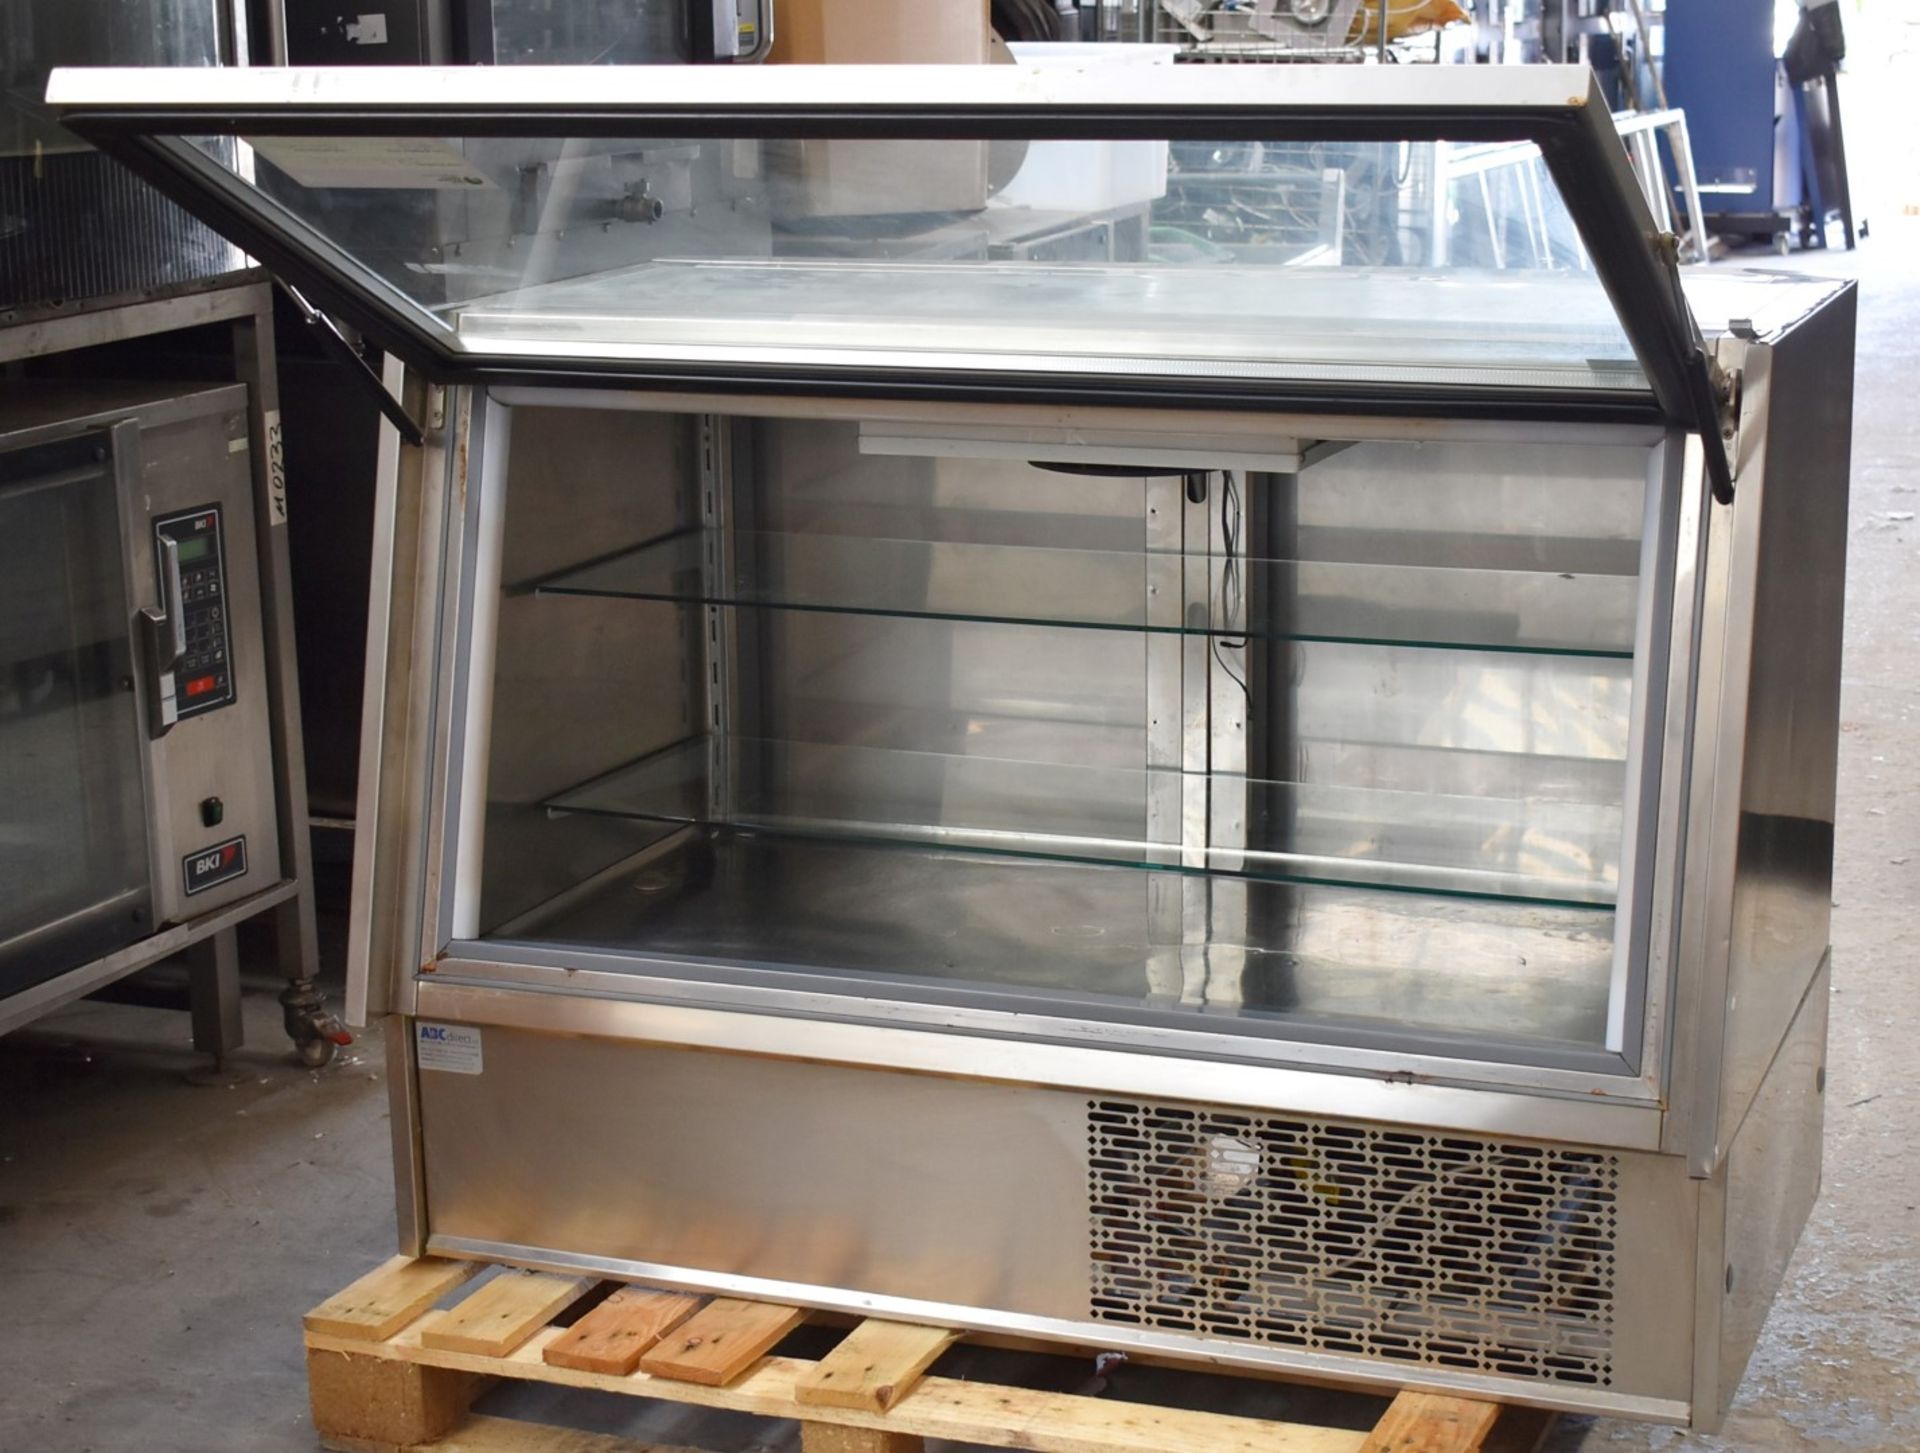 1 x Infrico 1.4m Refrigerated Vision Counter For Takeaways, Sandwich Shops or Cafes - RRP £3,200! - Image 18 of 21